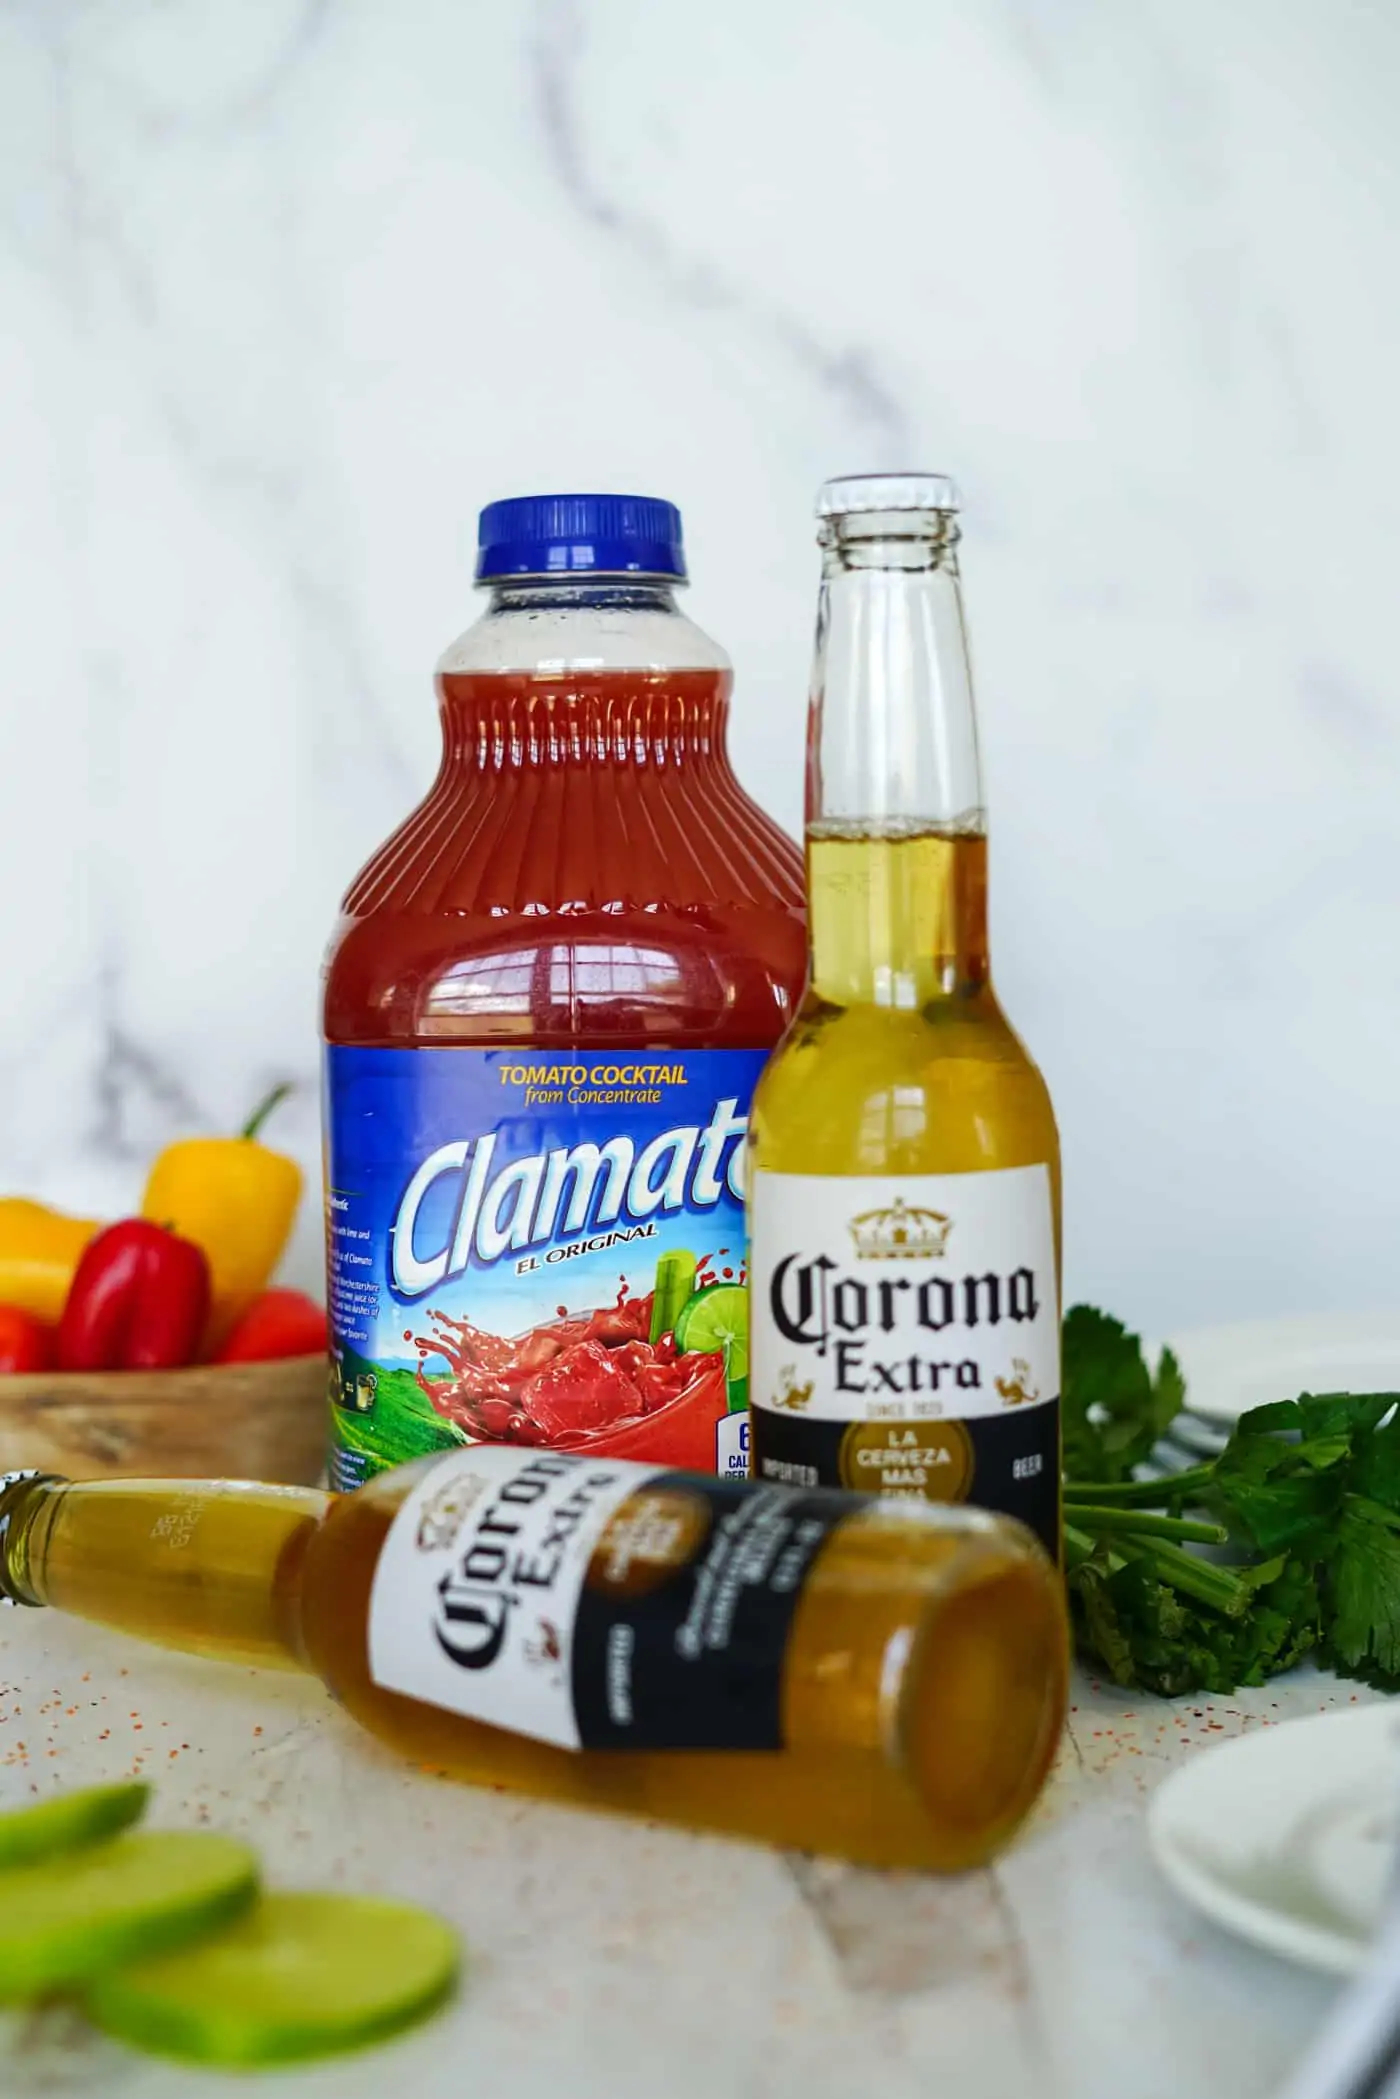 A large bottle of Clamato and two bottles of Corona beer for a Michelada recipe.